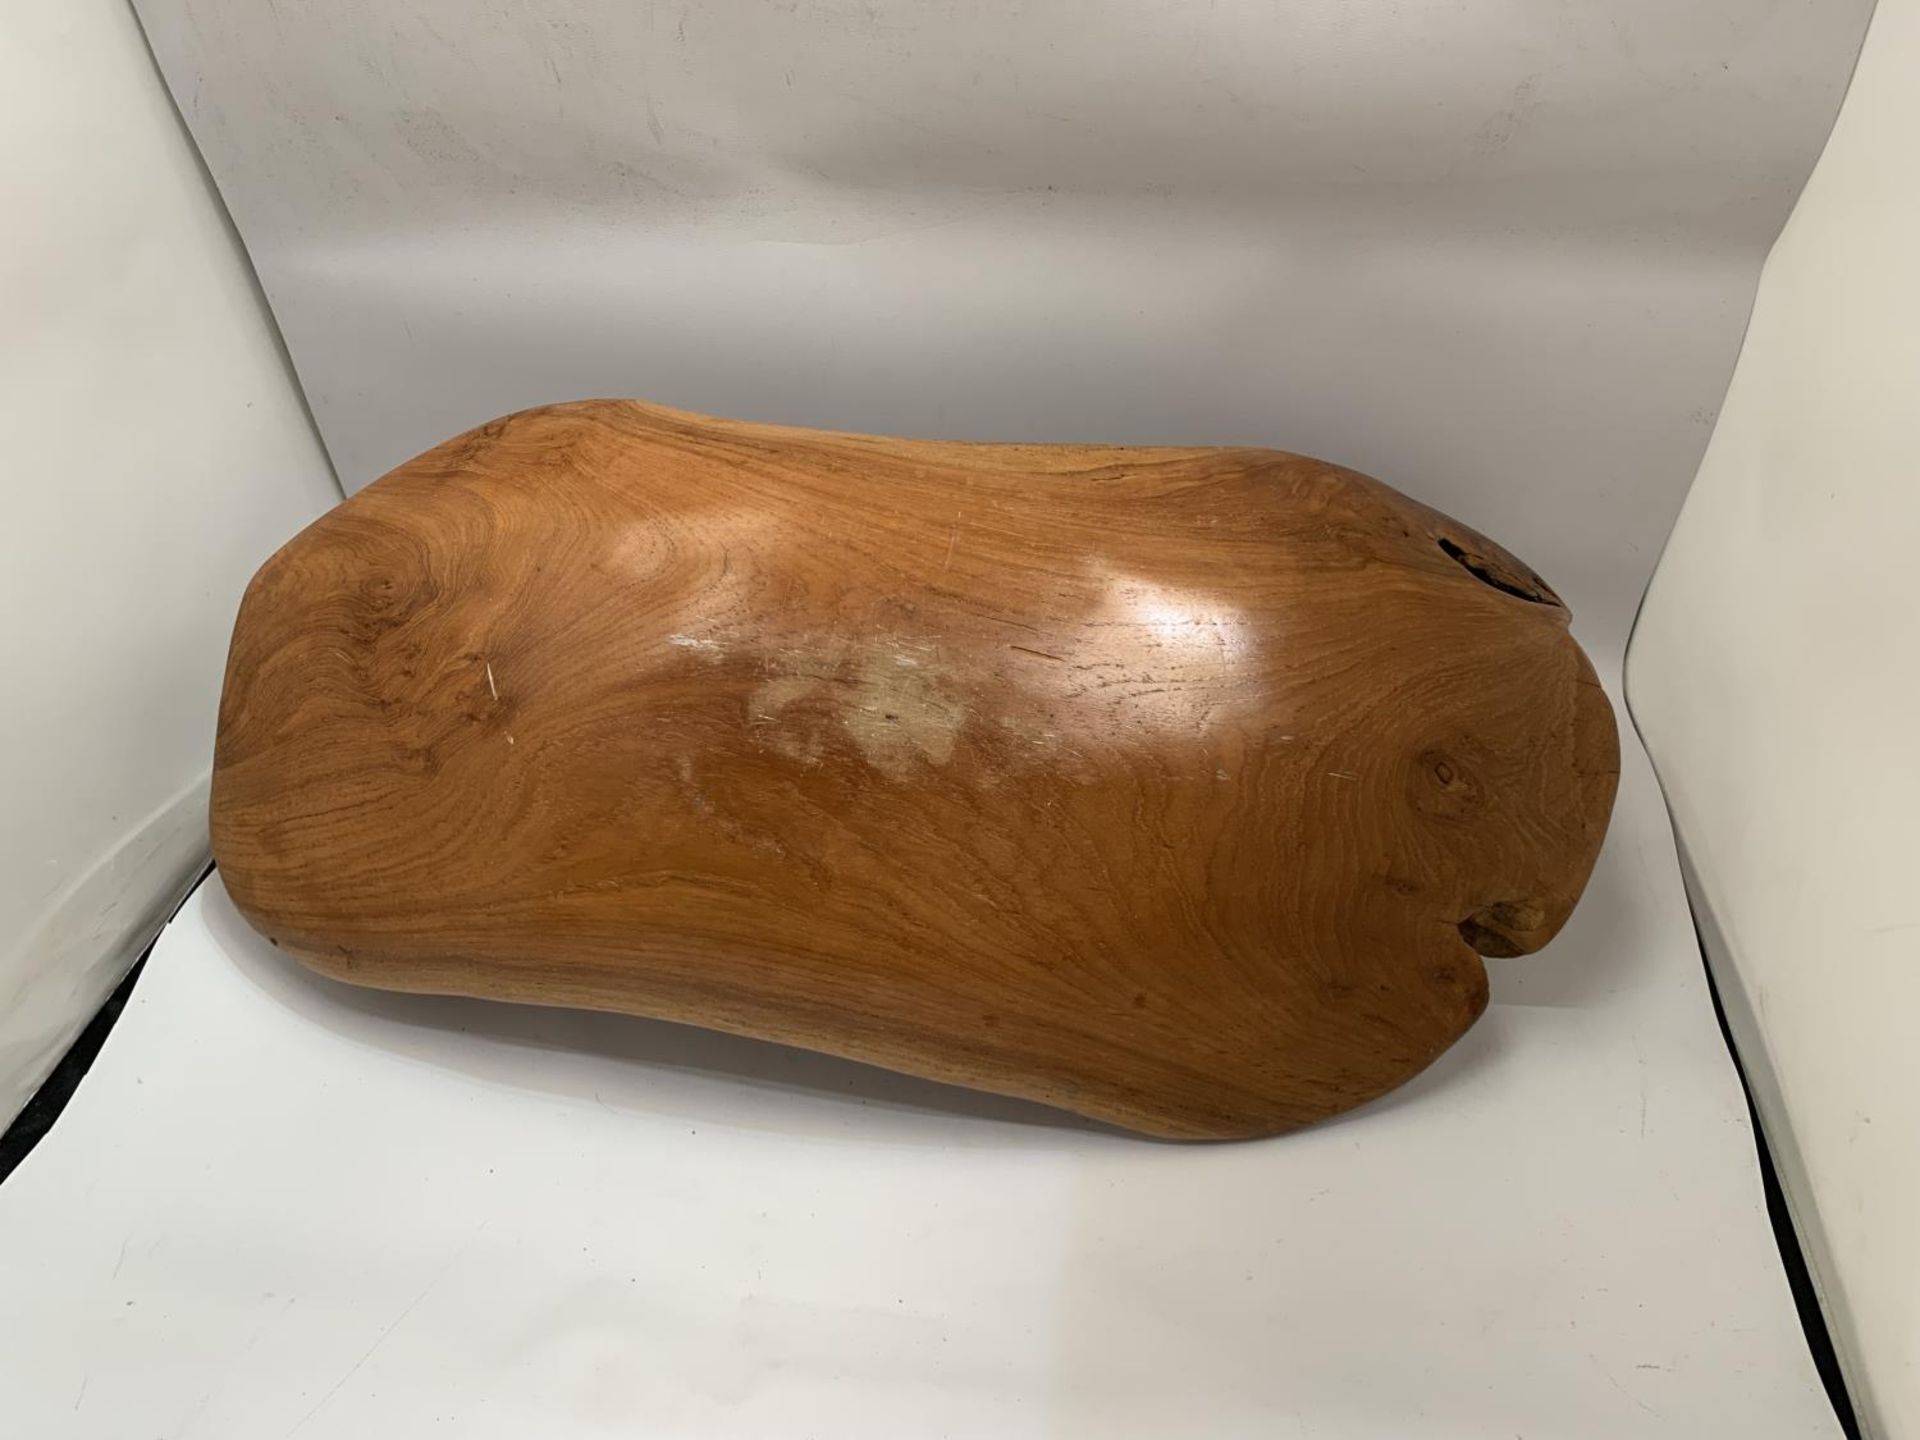 A LARGE VINTAGE HARDWOOD BOWL WITH HANDLE CARVED FROM ONE PIECE OF WOOD, LENGTH 50CM - Image 4 of 5